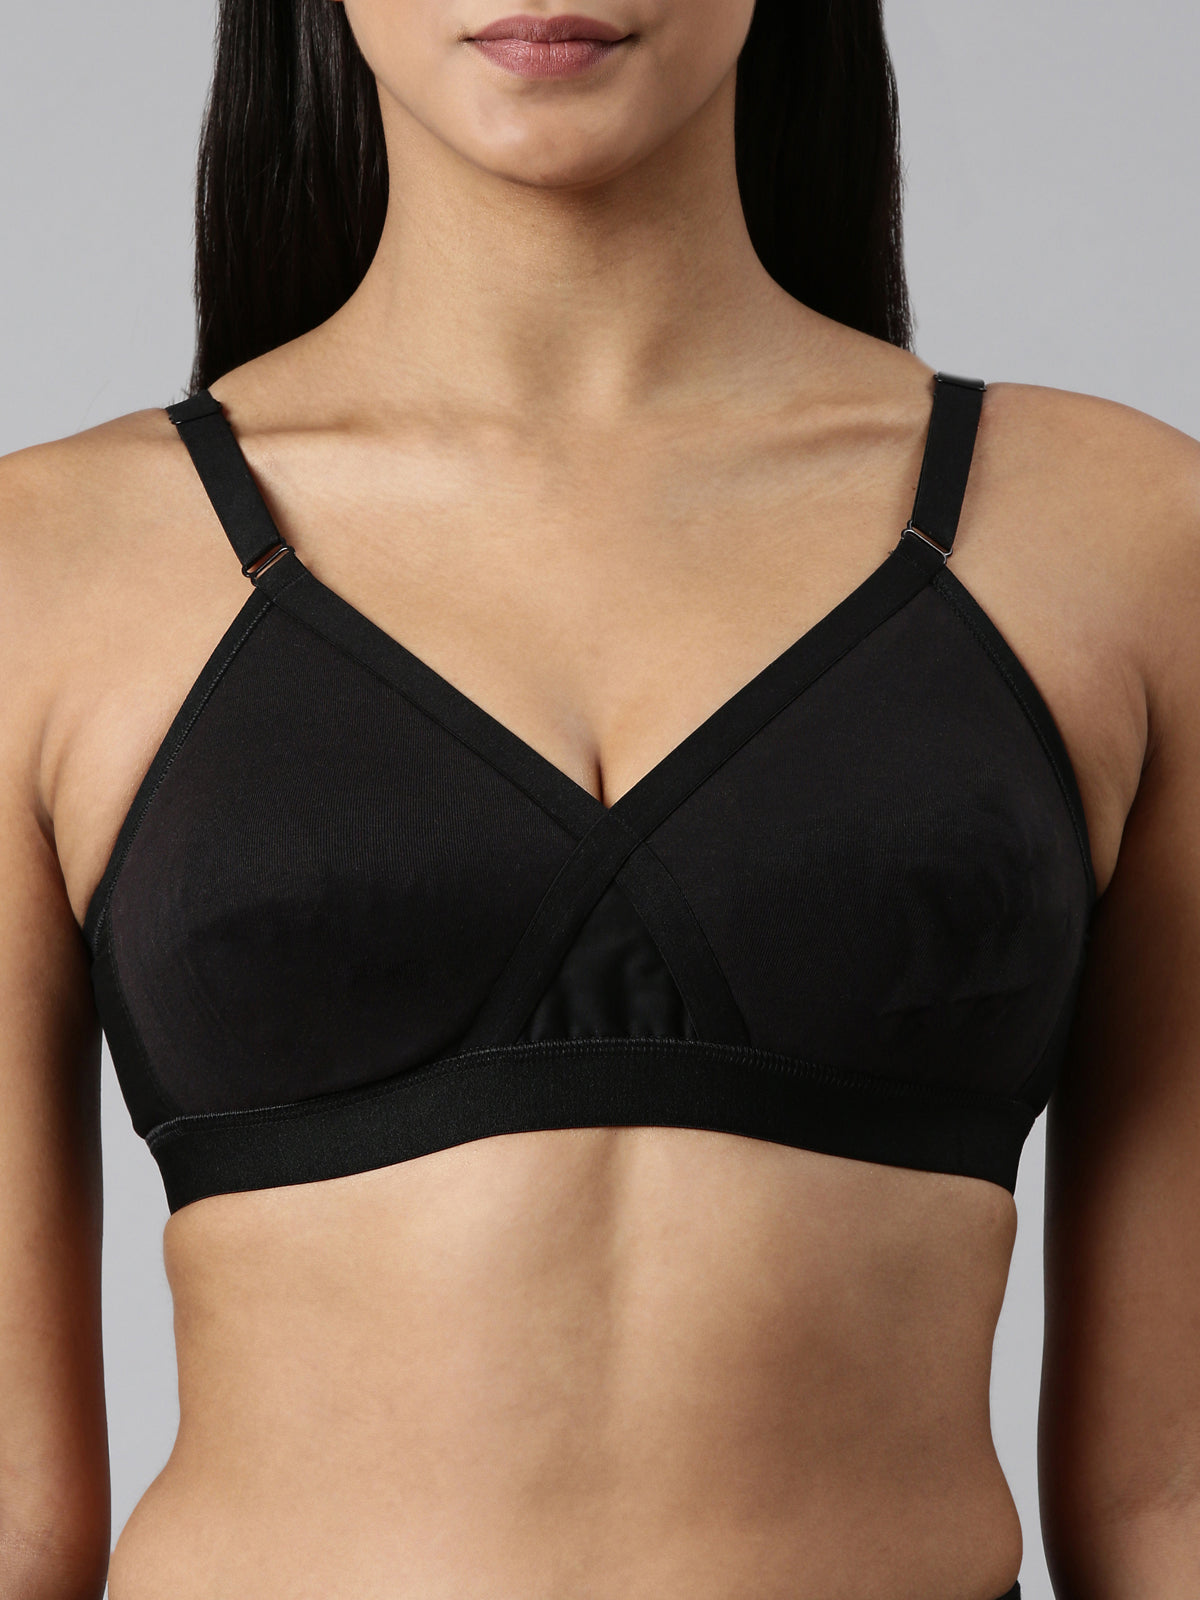 blossom-cotton cross-black1-Woven knitted-supportbra